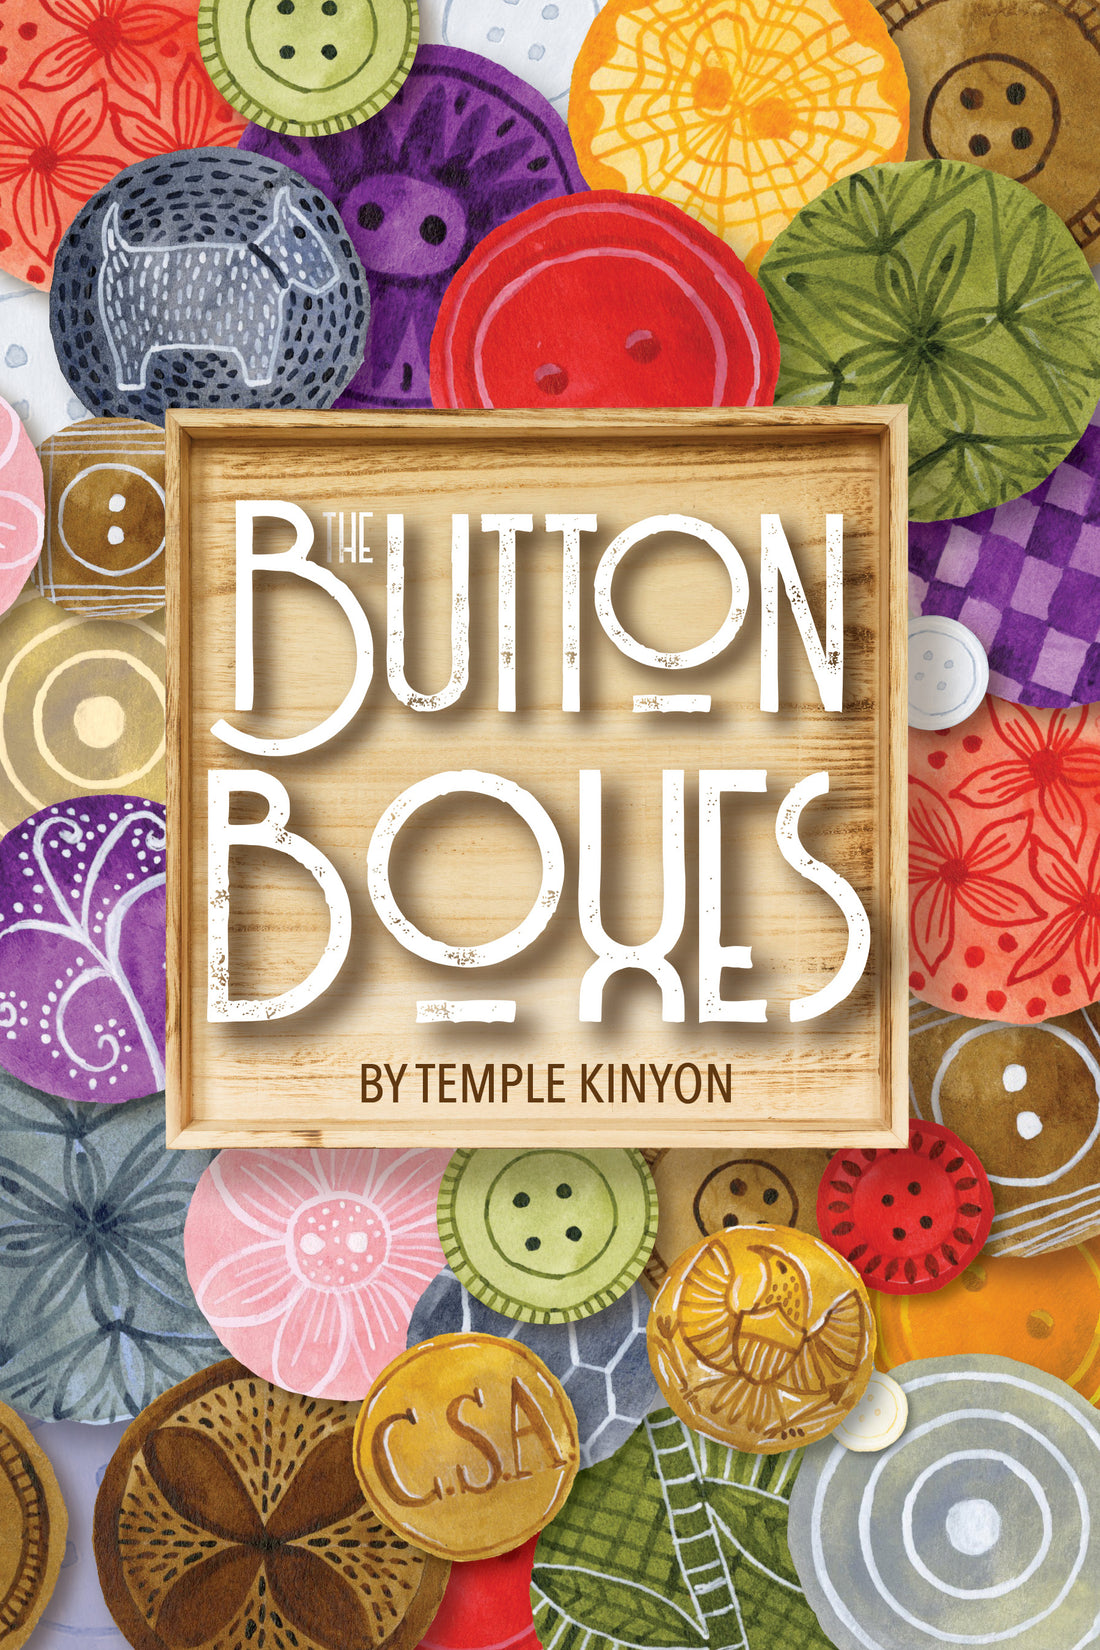 The making of the Button Boxes cover